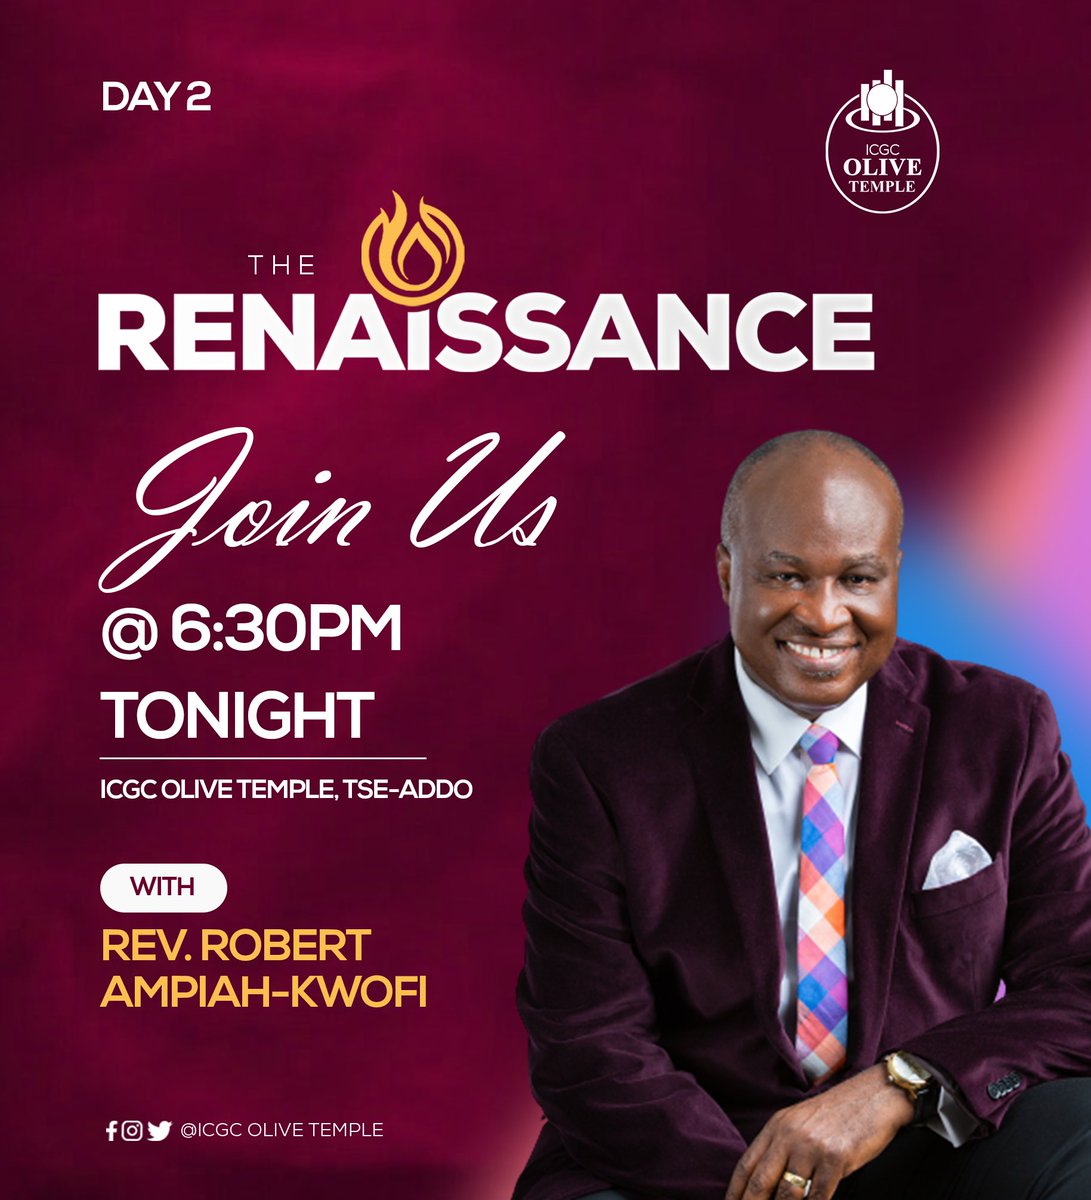 Day 1 was Glorious! Join us for Day 2 of The Renaissance with Rev. Dr. Ampiah-Kwofi. A life-changing encounter awaits YOU! See you there🔥🔥🔥
#renaissanceishere #renaissancehascome #icgcolivetemple #weareICGC #day2